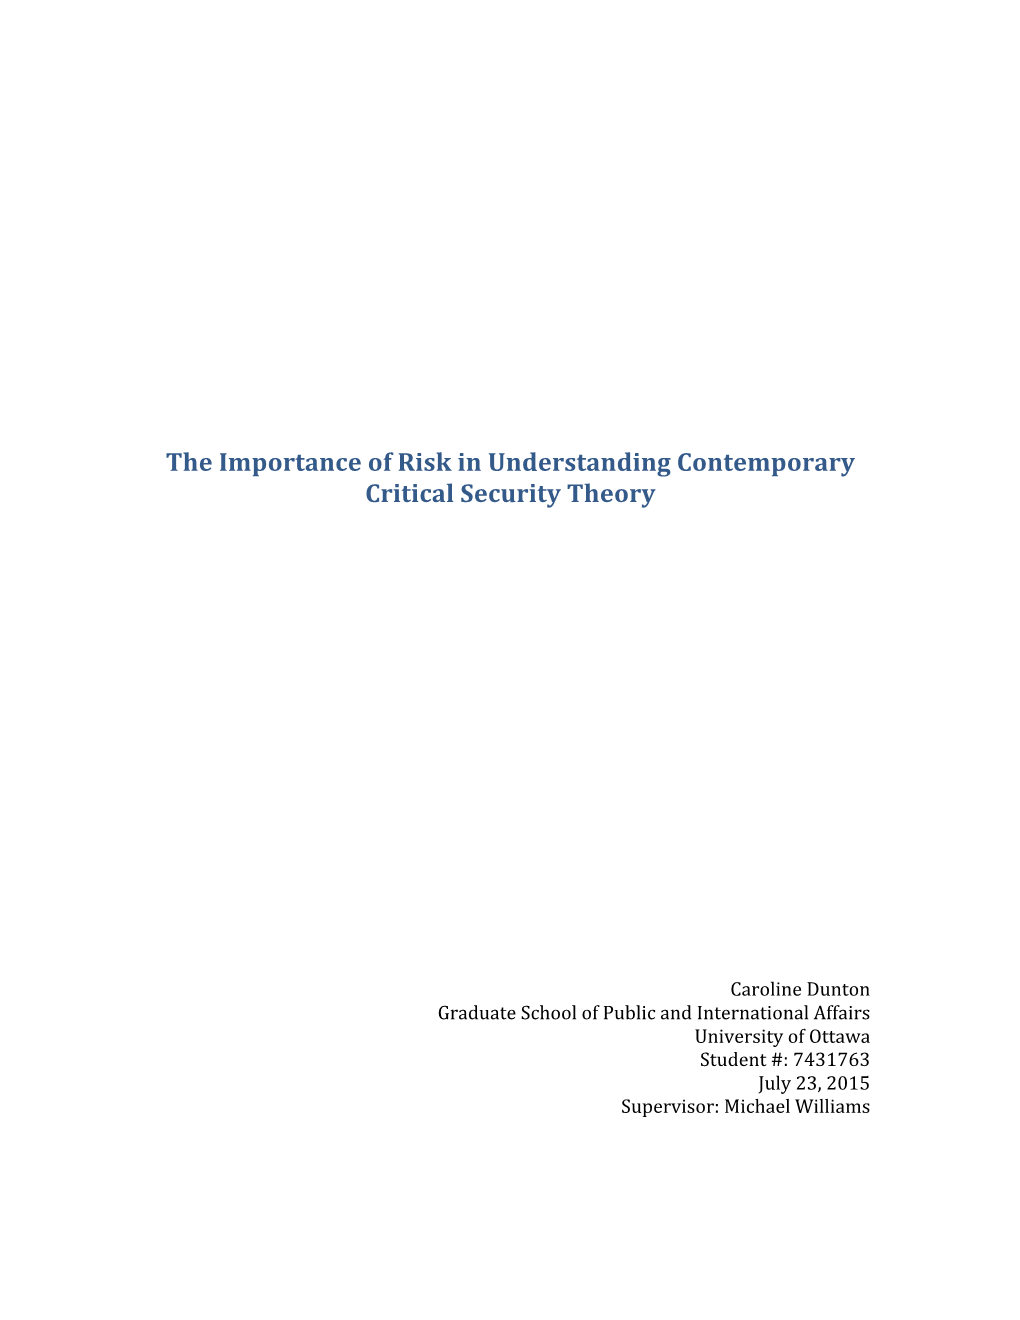 The Importance of Risk in Understanding Contemporary Critical Security Theory